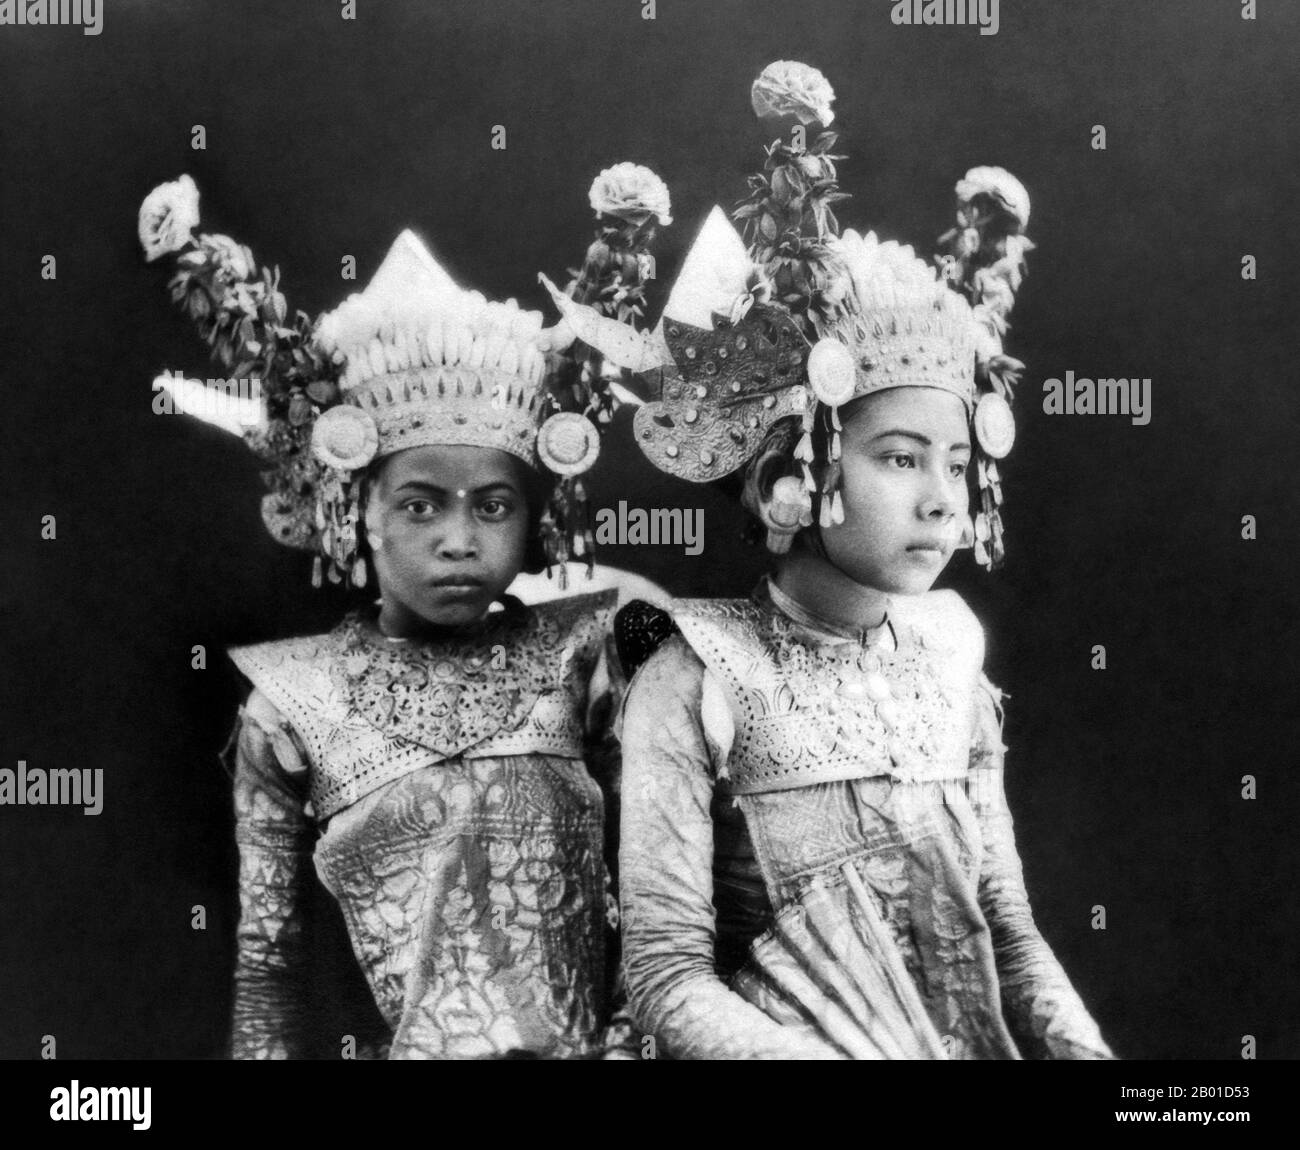 Indonesia: Two very young Legong dancers posing on the island of Bali, c. 1929.  Legong is a form of Balinese dance. It is a refined dance form characterised by intricate finger movements, complicated footwork, and expressive gestures and facial expressions.  Legong probably originated in the 19th century as royal entertainment. Legend has it that a prince of Sukwati fell ill and had a vivid dream in which two maidens danced to gamelan music. When he recovered, he arranged for such dances to be performed in reality. Stock Photo